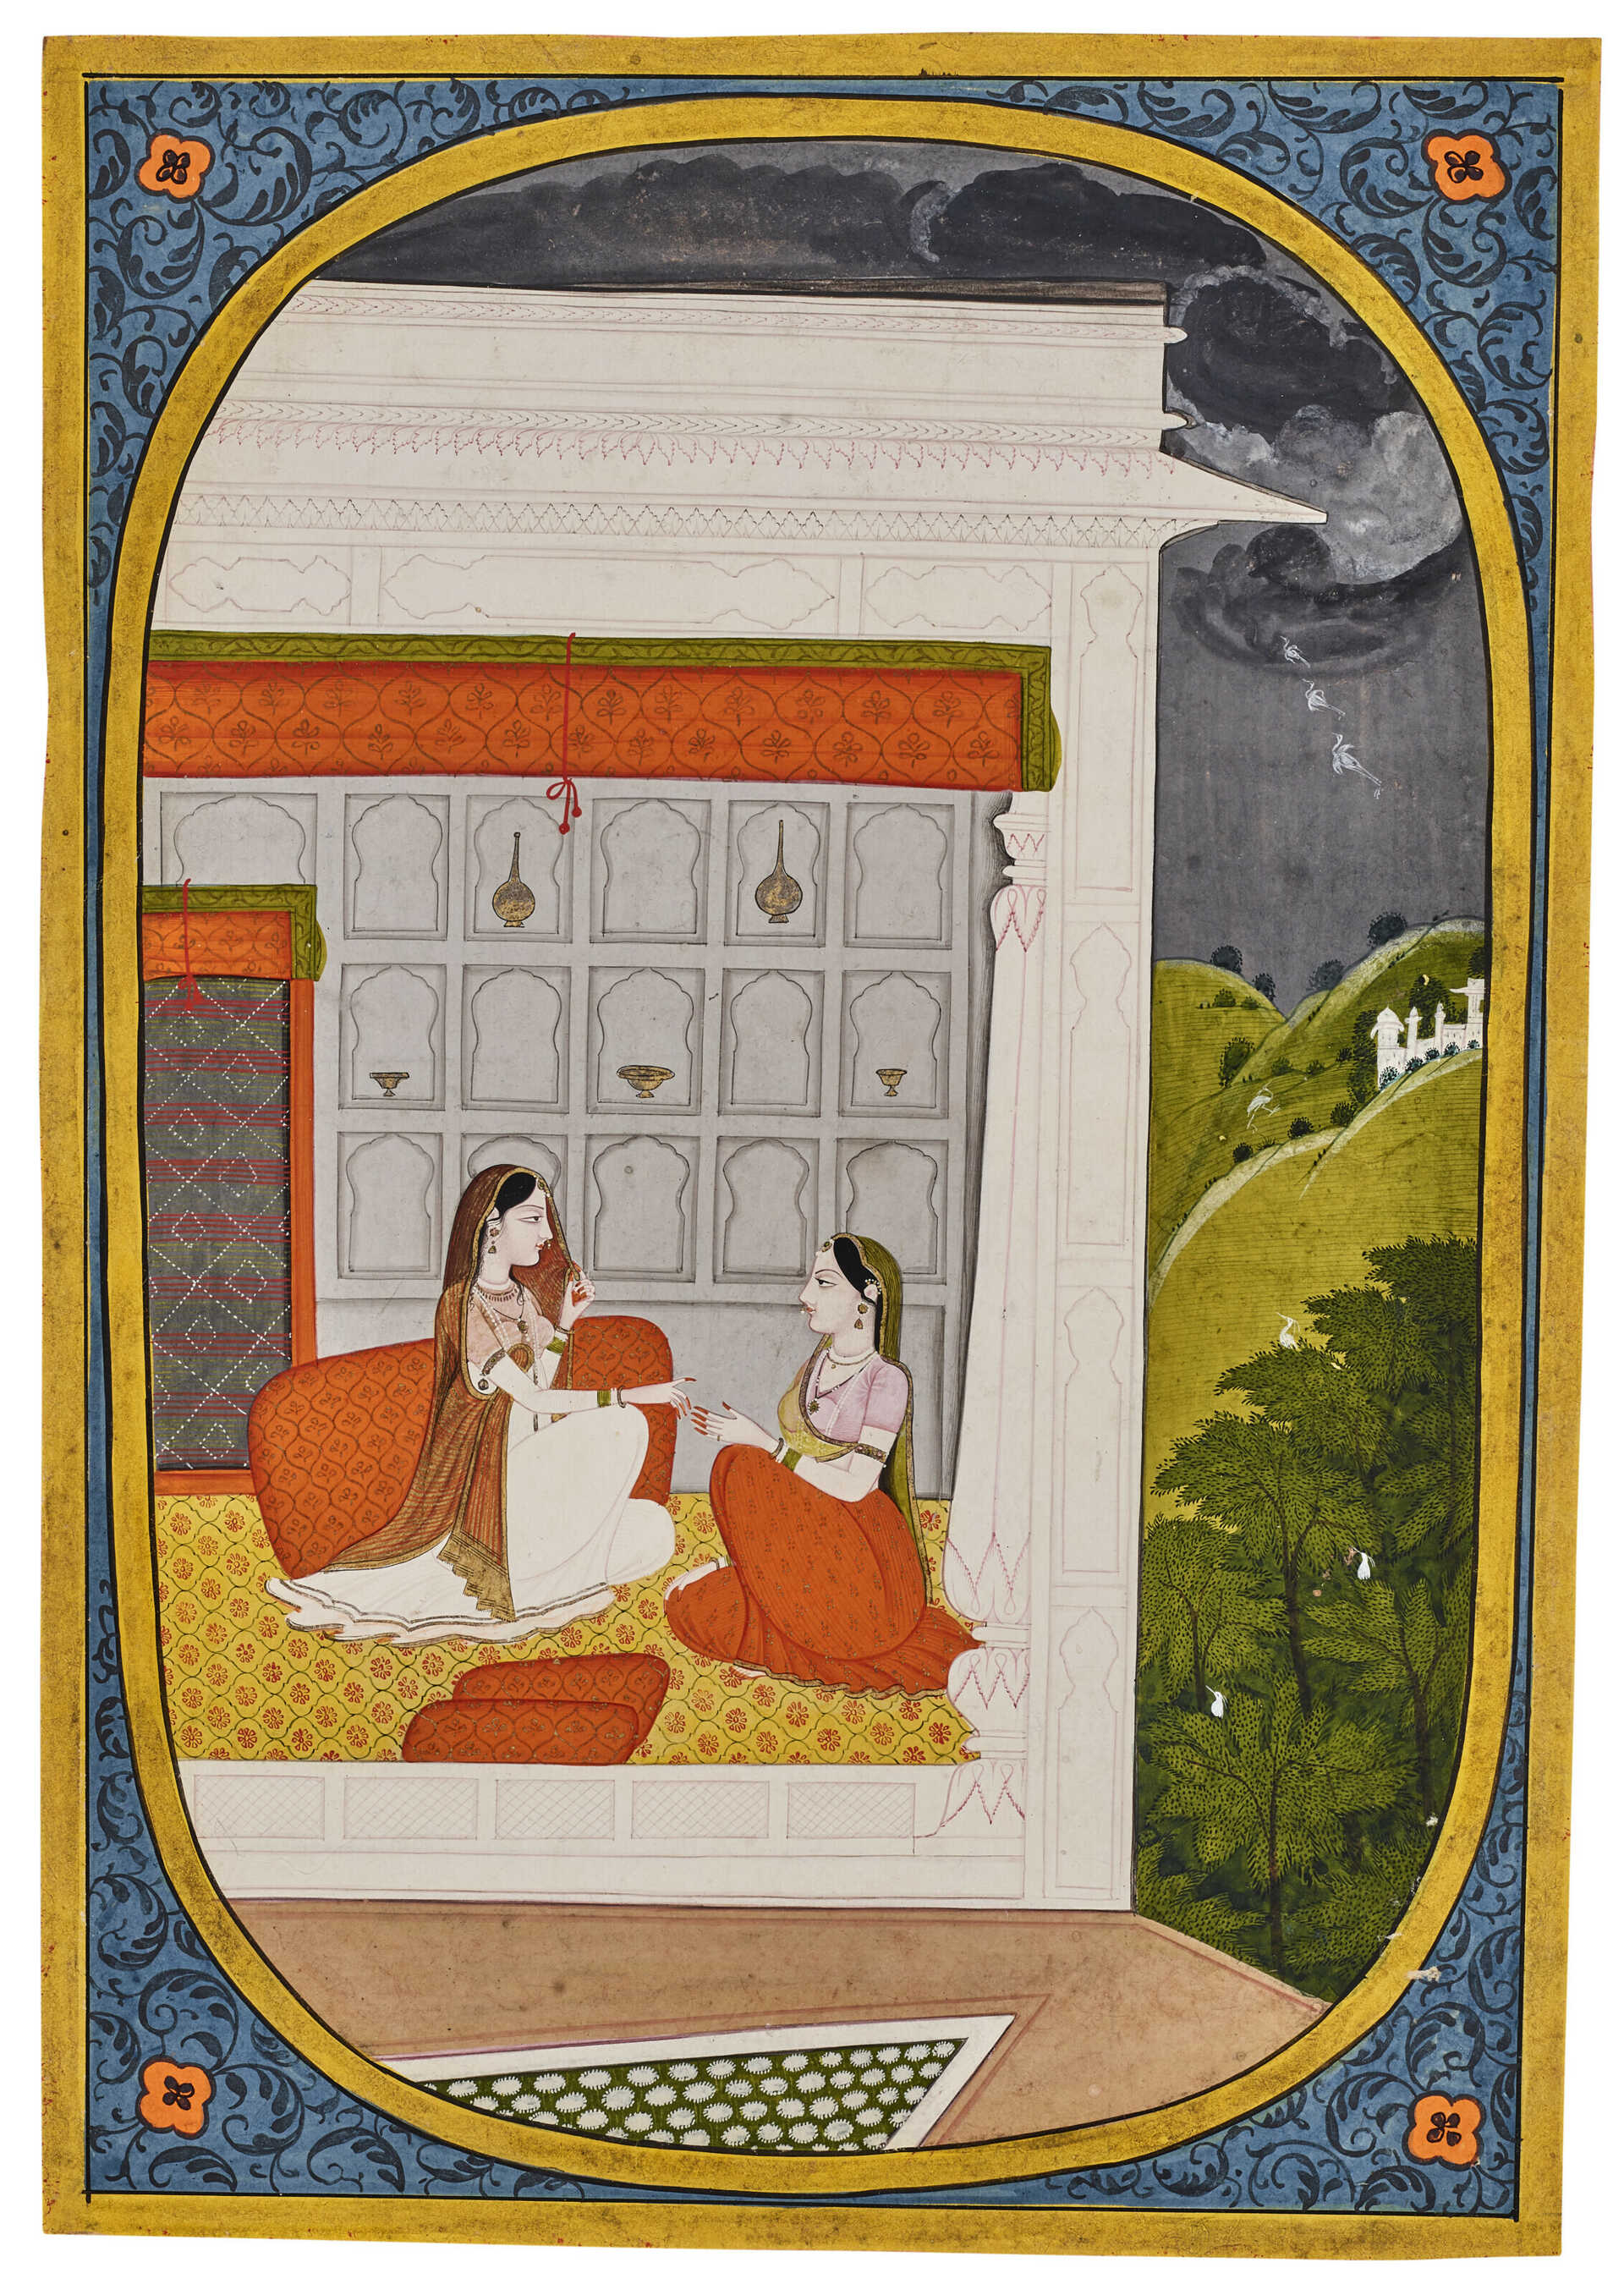 A PAINTING FROM A RASIKAPRIYA SERIES: RADHA AND HER CONFIDANT